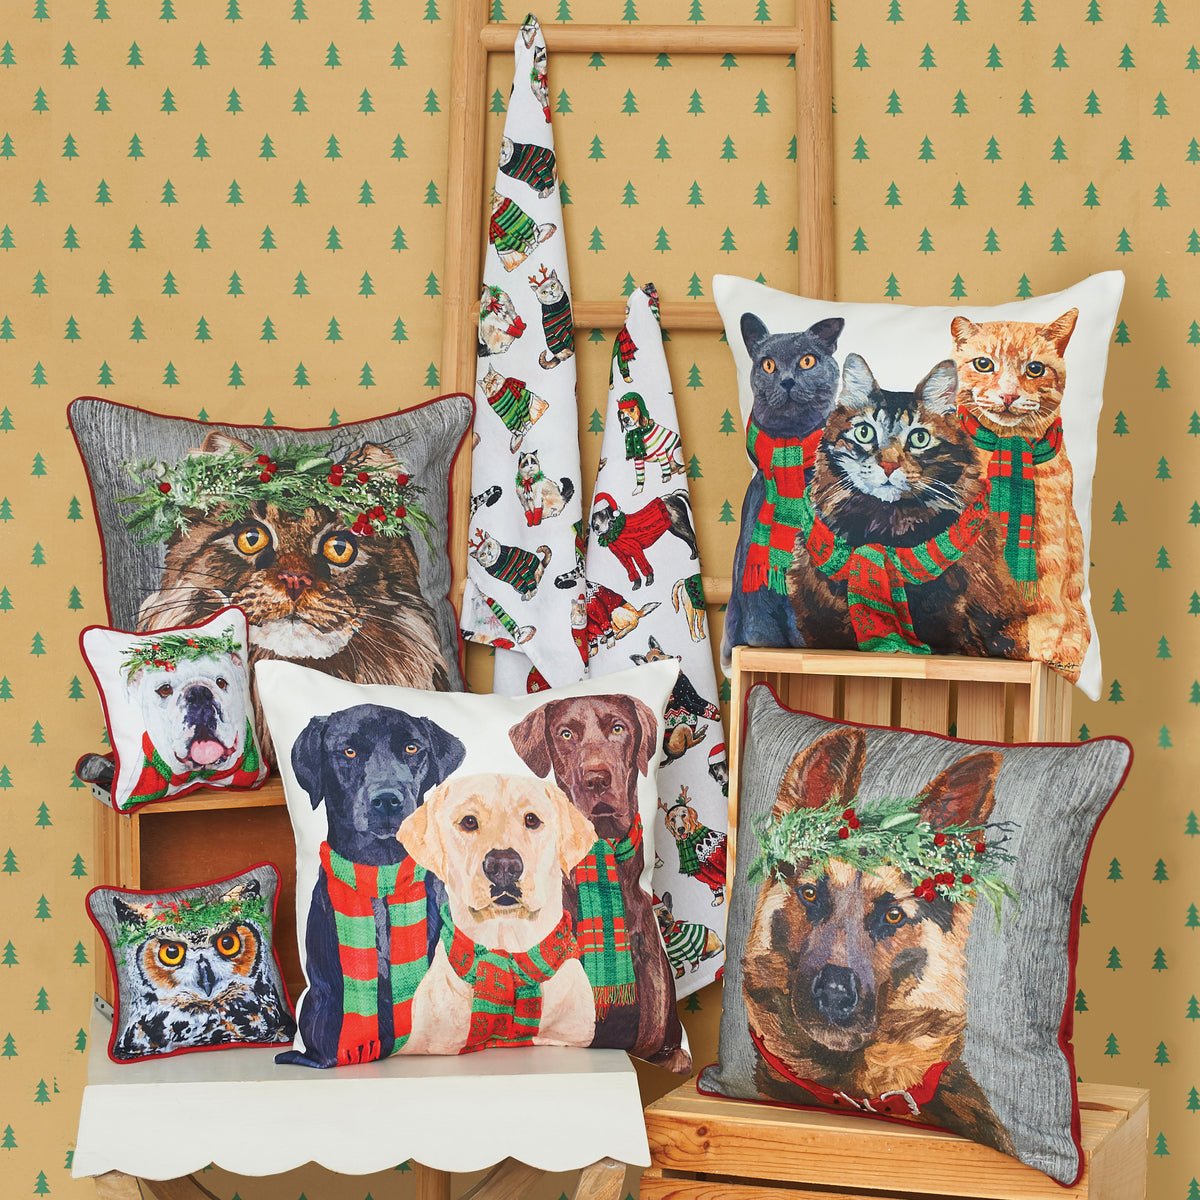 C&F Home Pet holiday gifts include decorative pillows, towels, and more.